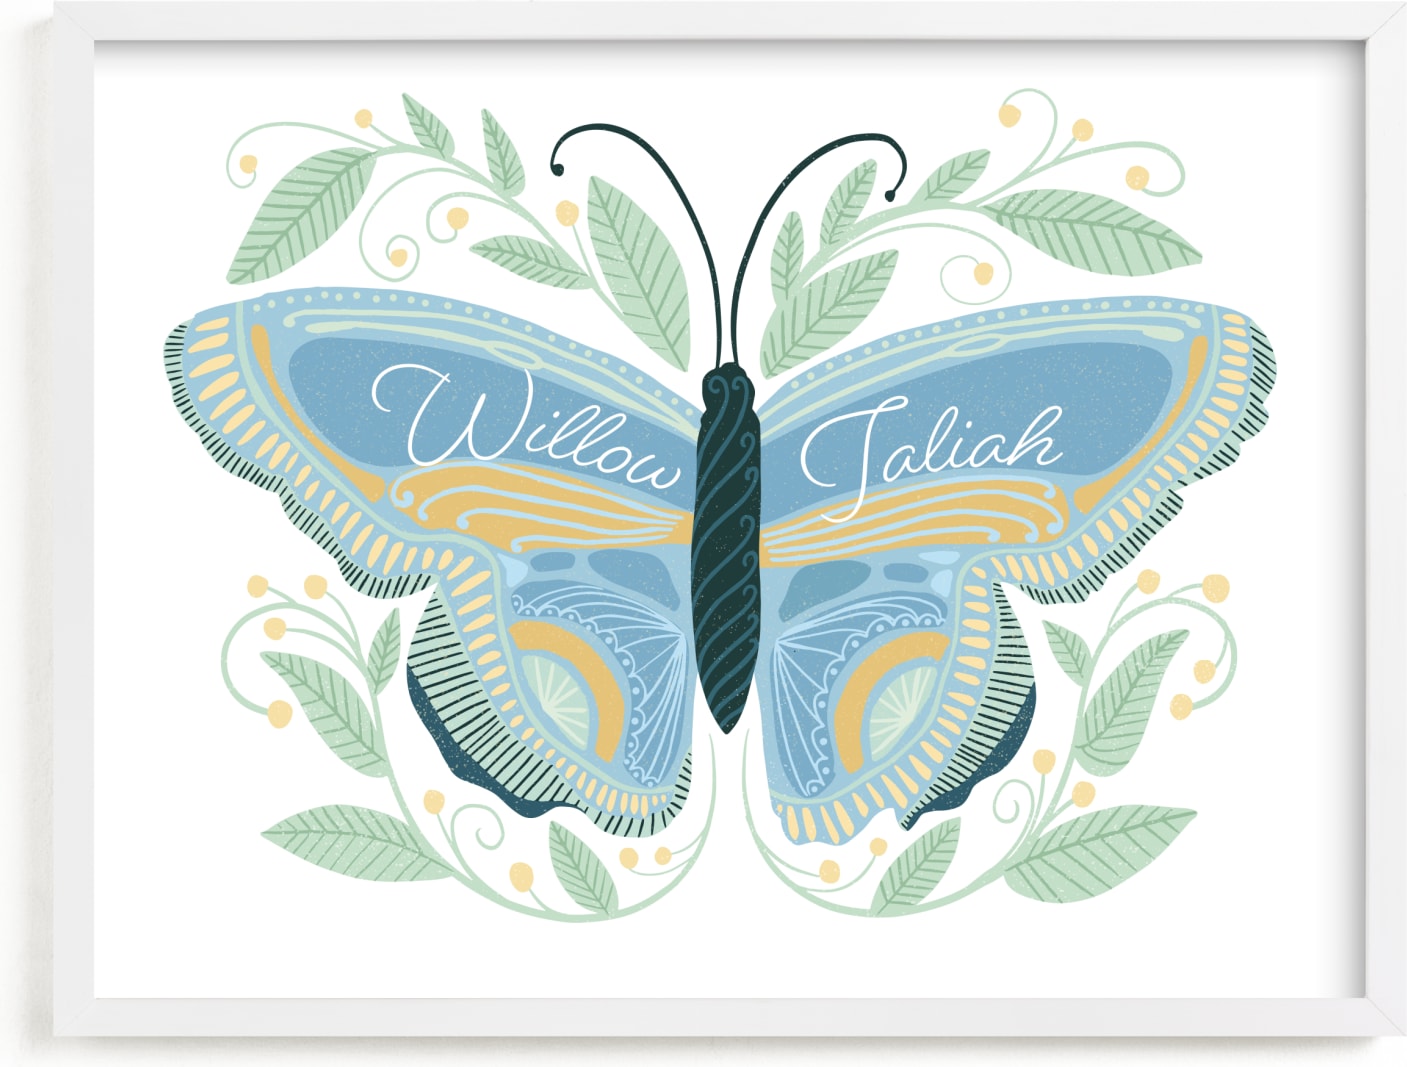 This is a blue personalized art for kid by Blue Ombre co called Flutter & Fly.